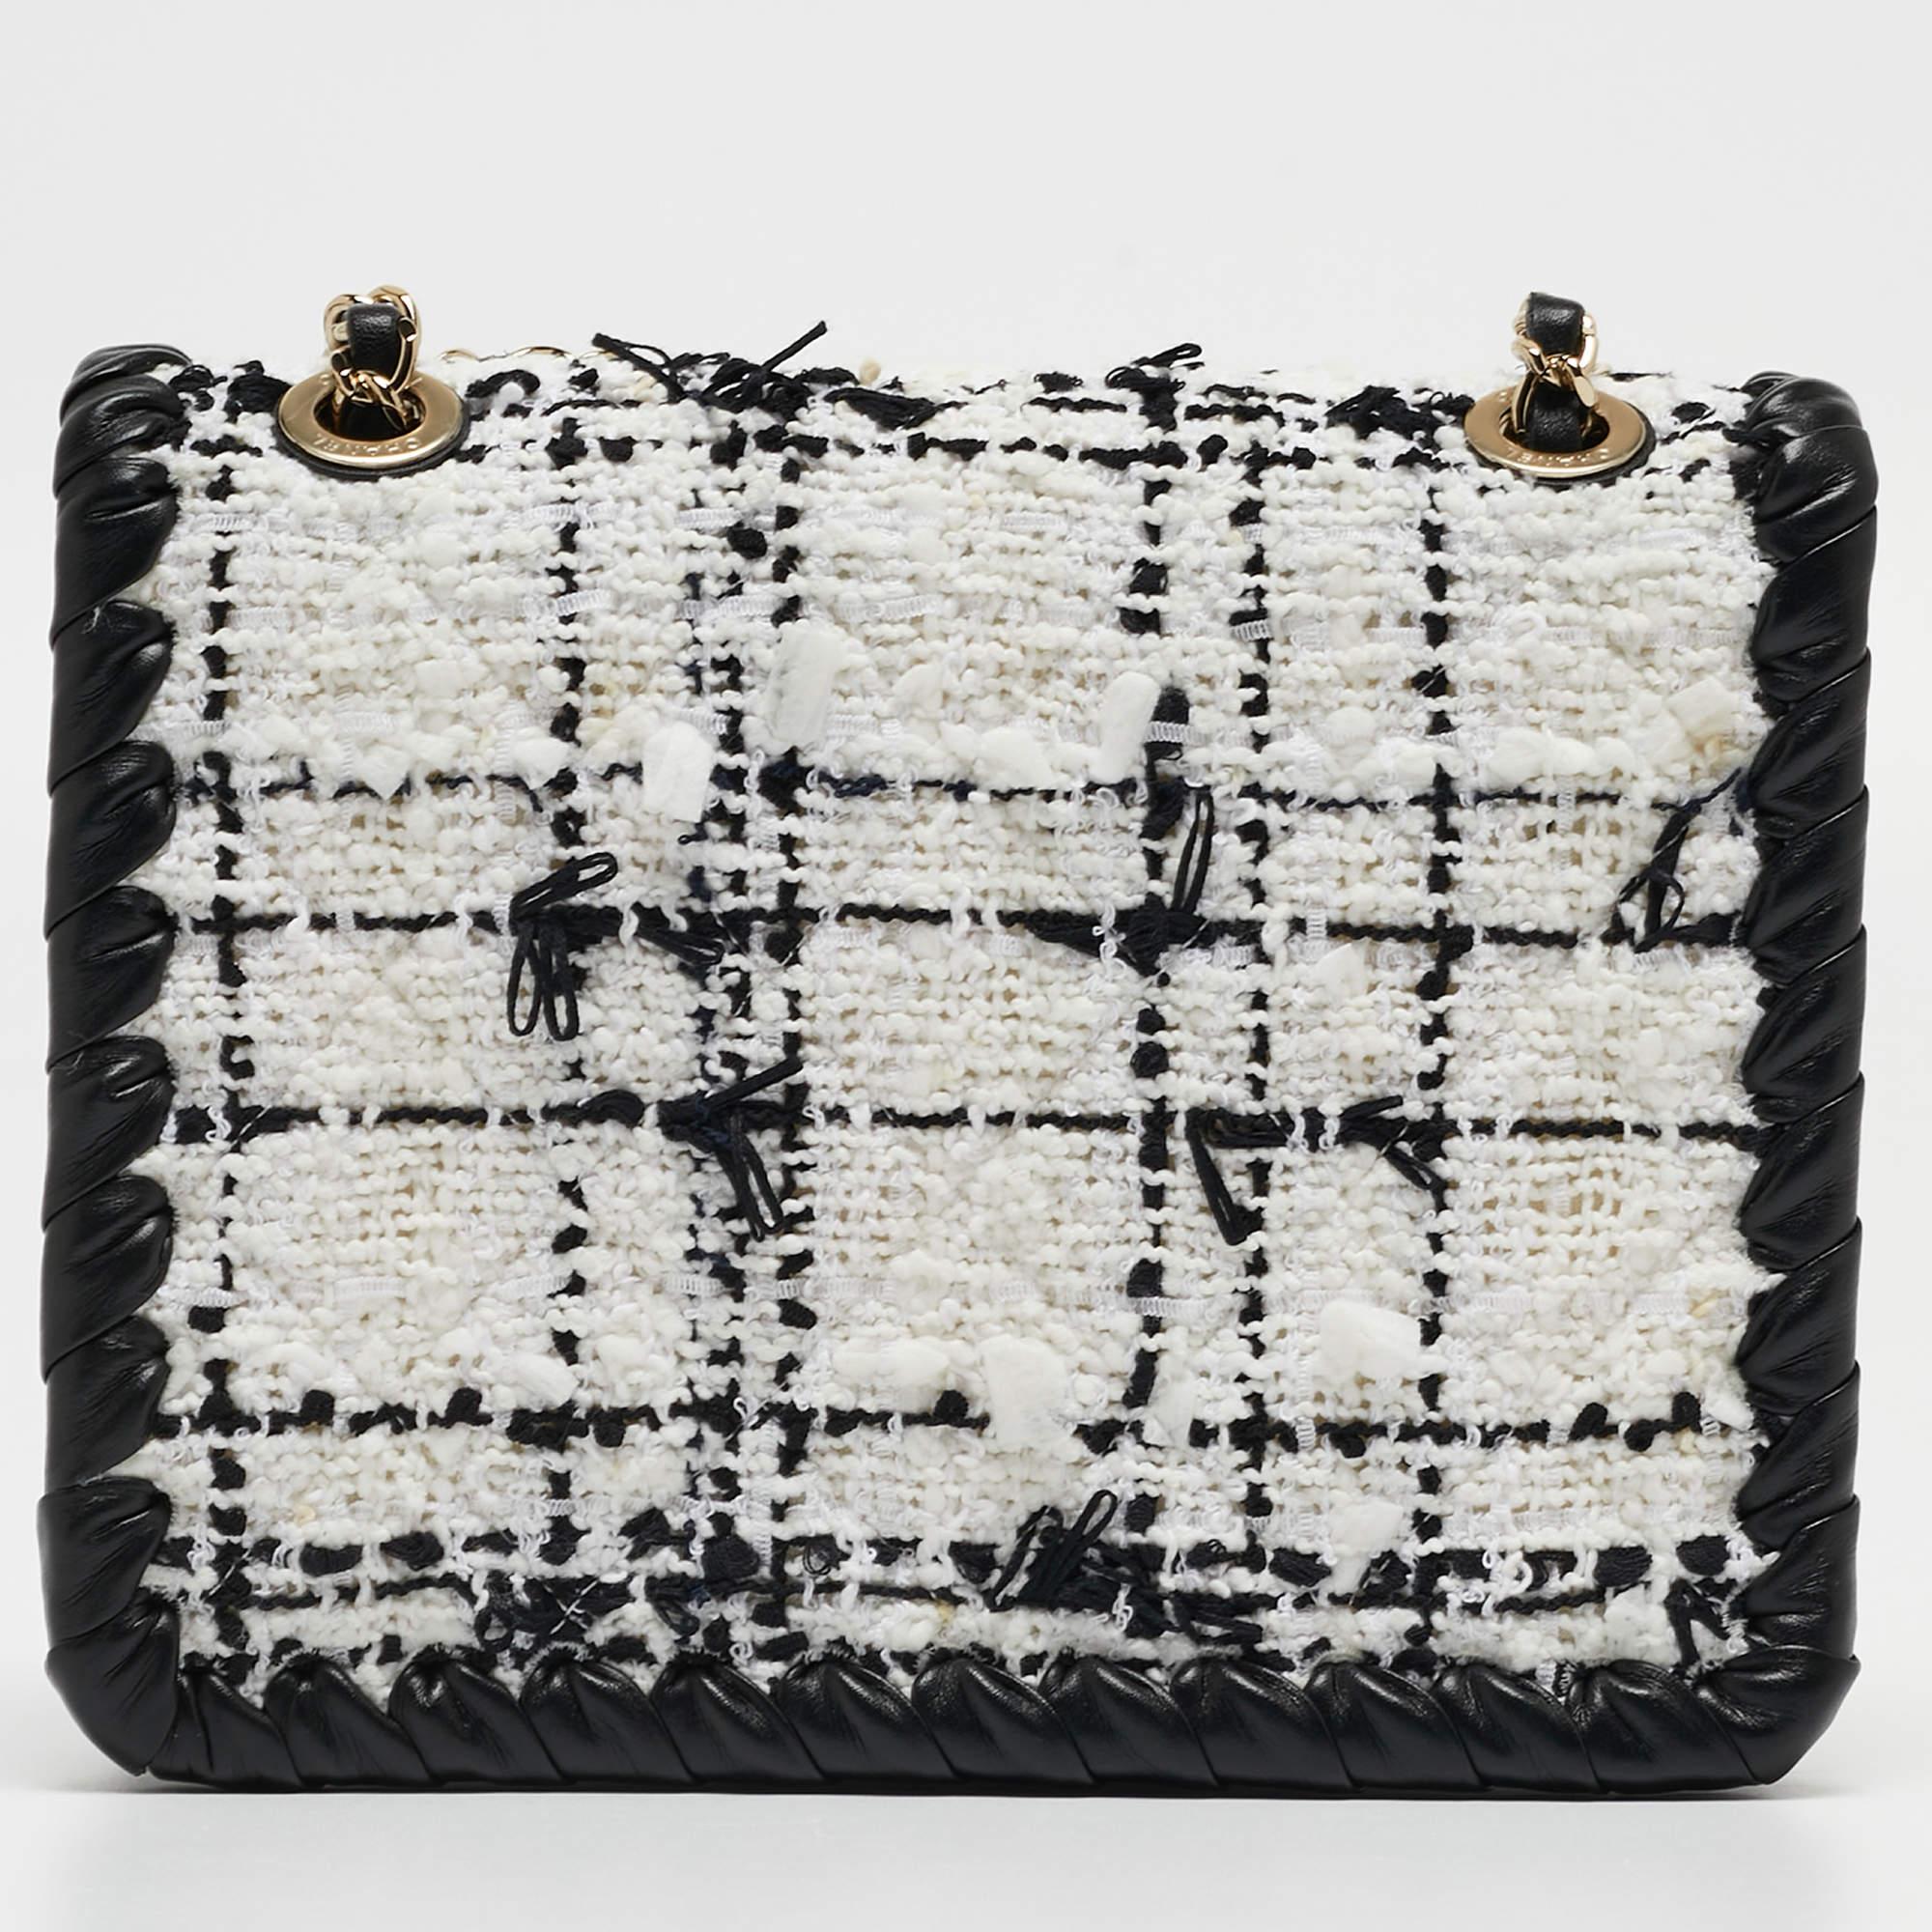 The Chanel My Own Frame Flap Bag is an elegant masterpiece featuring a timeless blend of black and white tweed with luxurious leather accents. Its mini size, framed structure, and iconic flap design exude sophistication, making it a coveted fashion